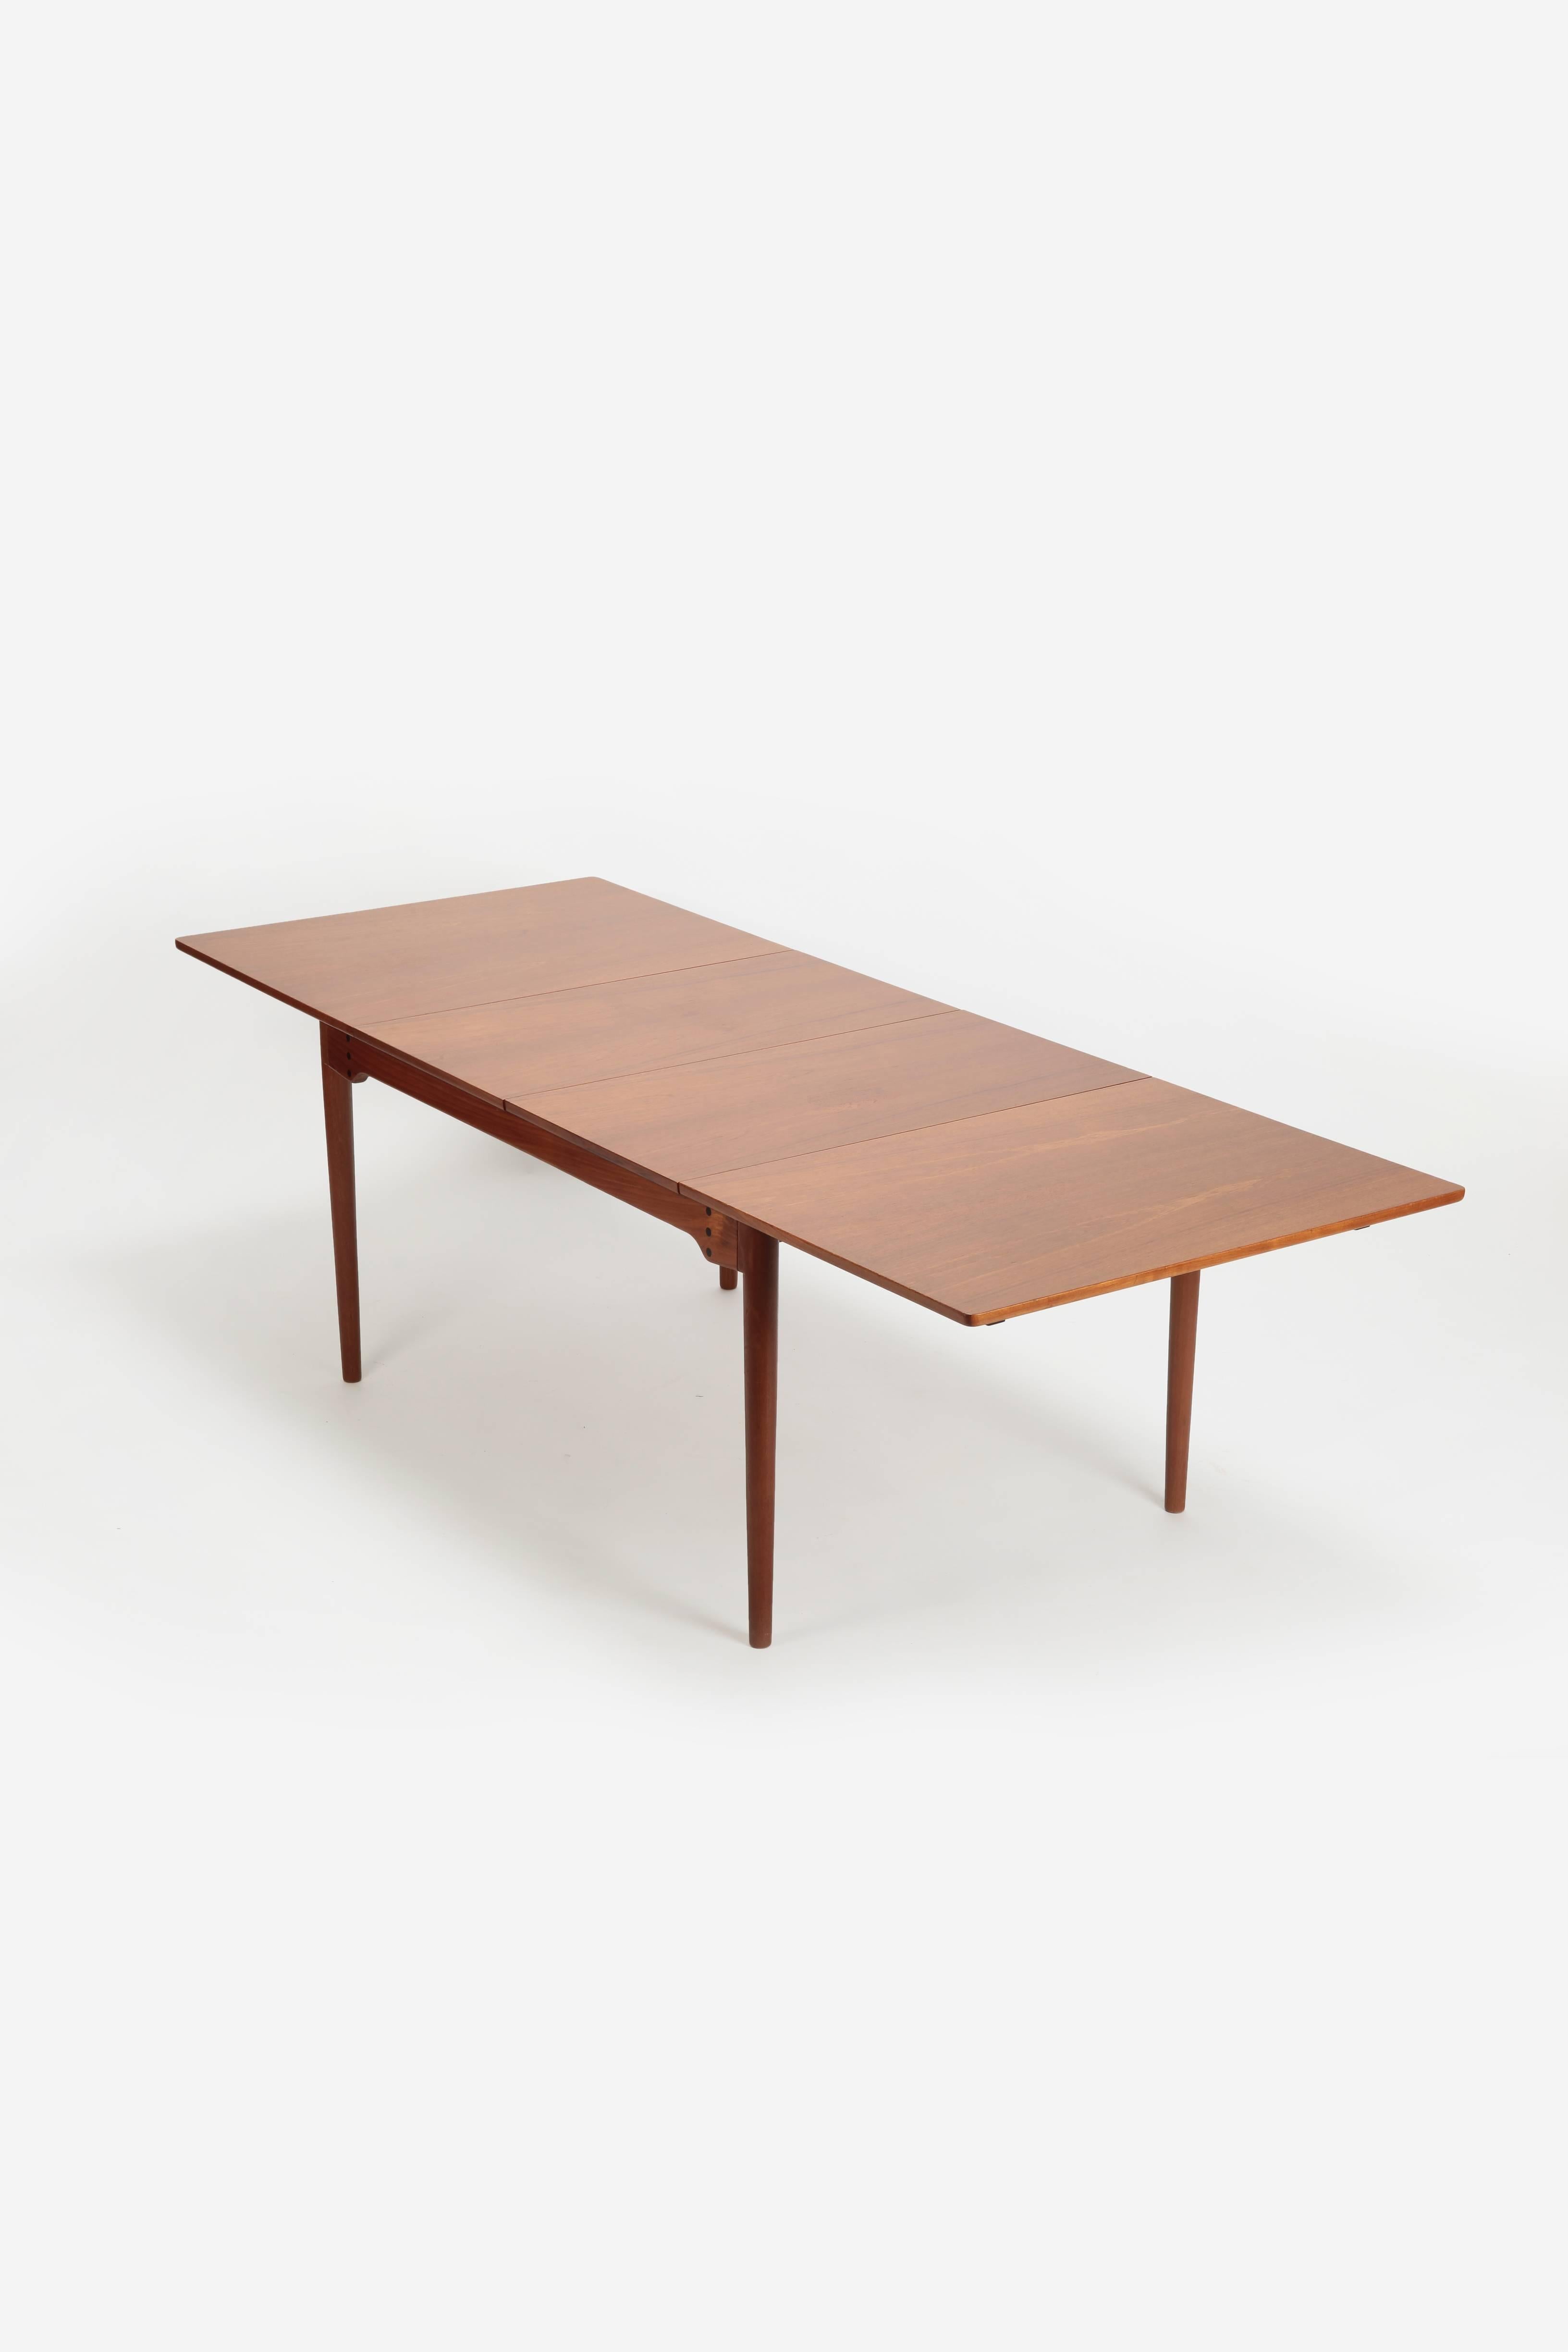 Finn Juhl teak dining table manufactured by France & Son in the 1950s. This table has one of the simplest and most elegant leaf storage designs. Maximum length 240 cm.